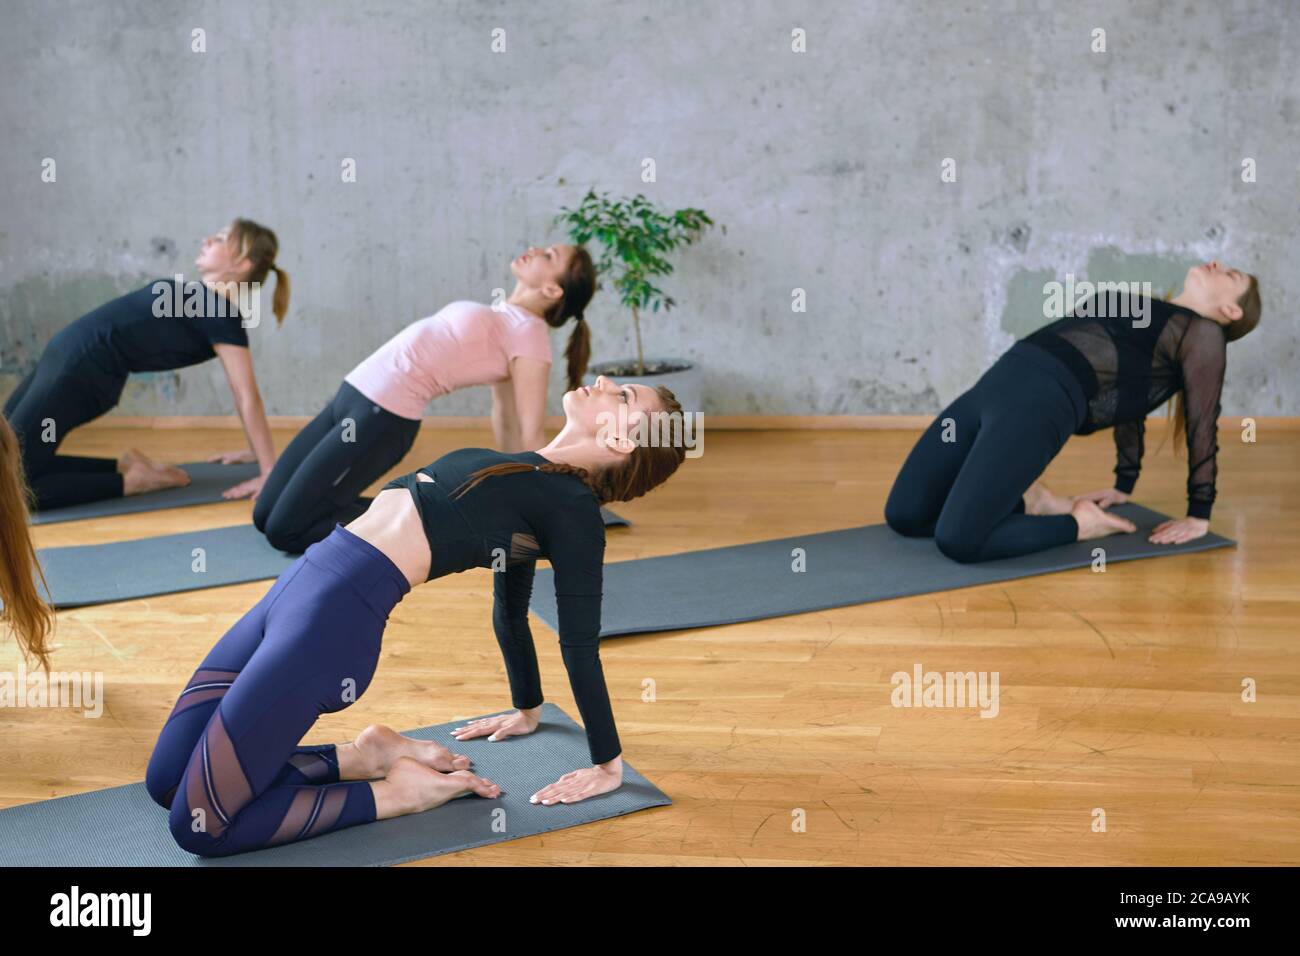 Side view of group of young fitnesswomen in sportswear practicing yoga pose, standing on knees and touching floor behind, working in studio, loft interior. Concept of healthy lifestyle, yoga. Stock Photo